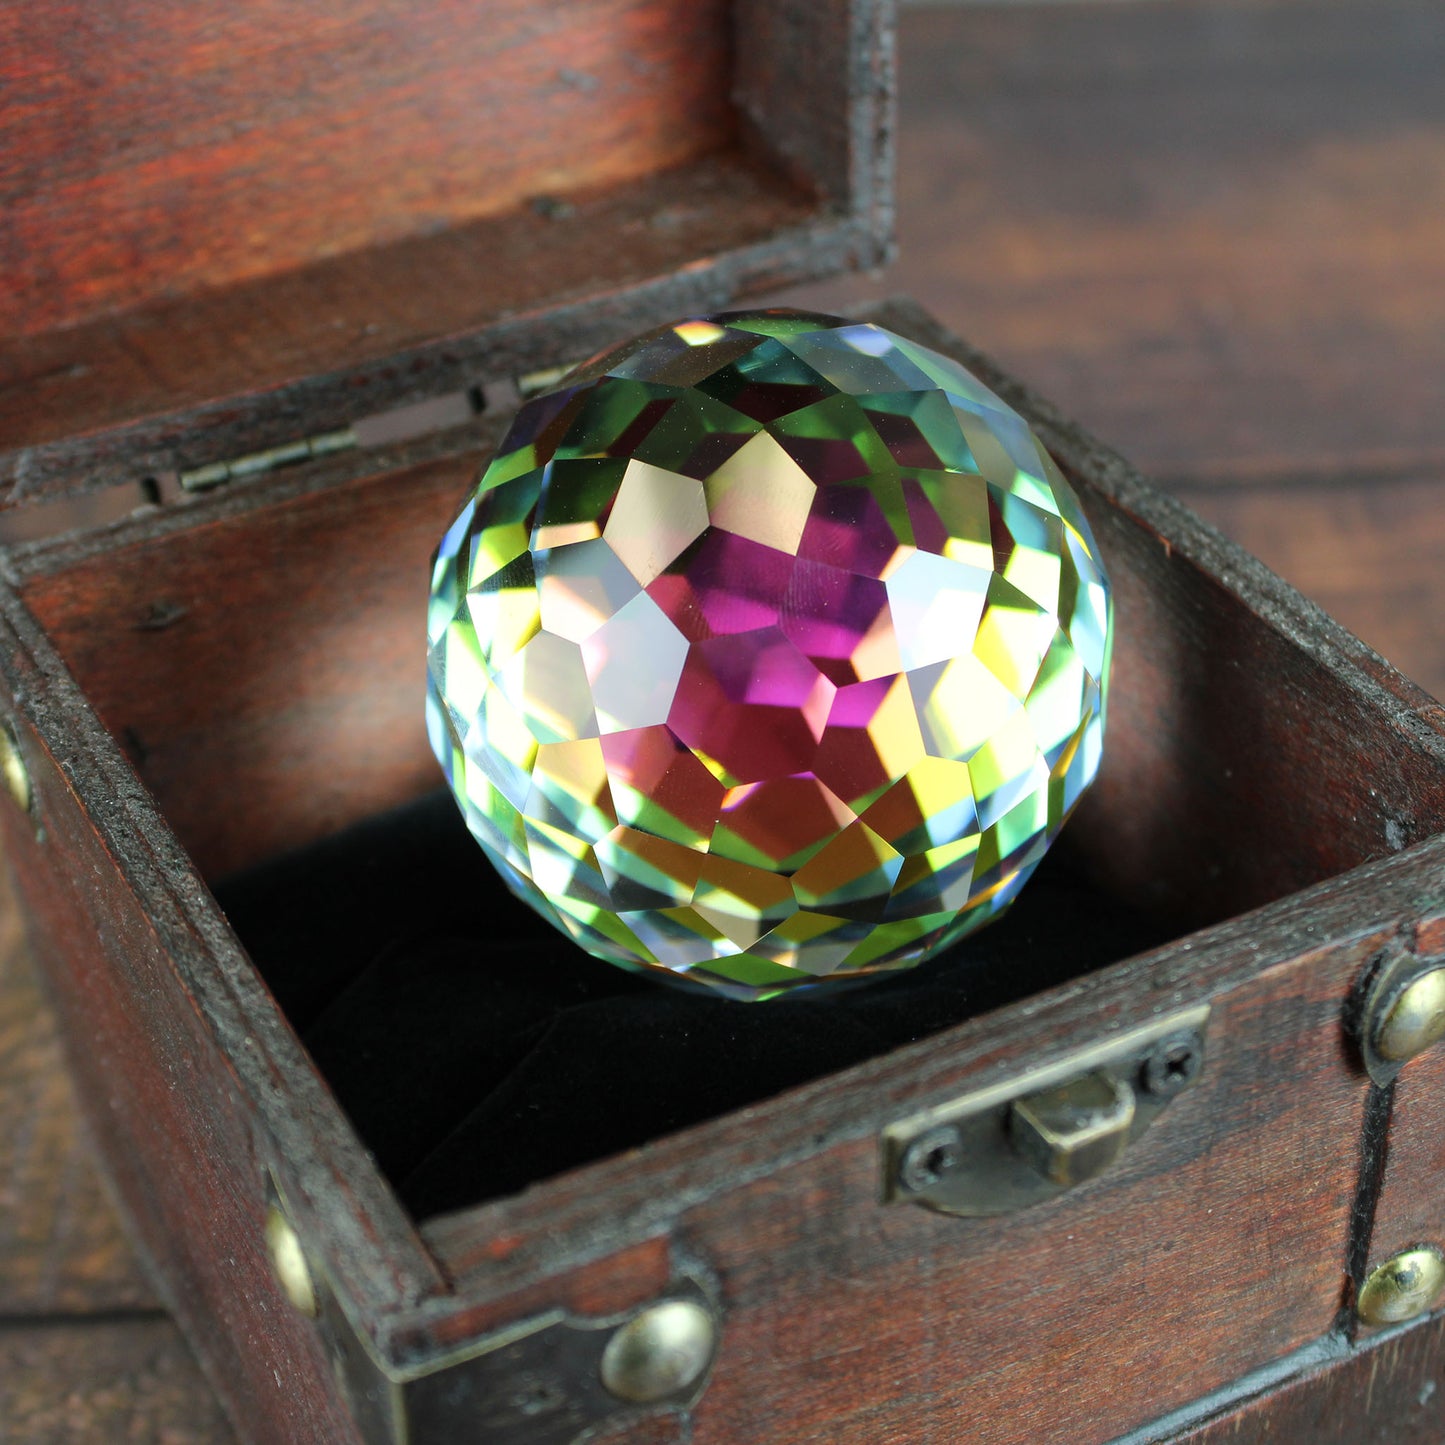 The Arkenstone™ Replica In Dwarven Treasure Box Lord of the Rings The Hobbit Thorin Oakenshield